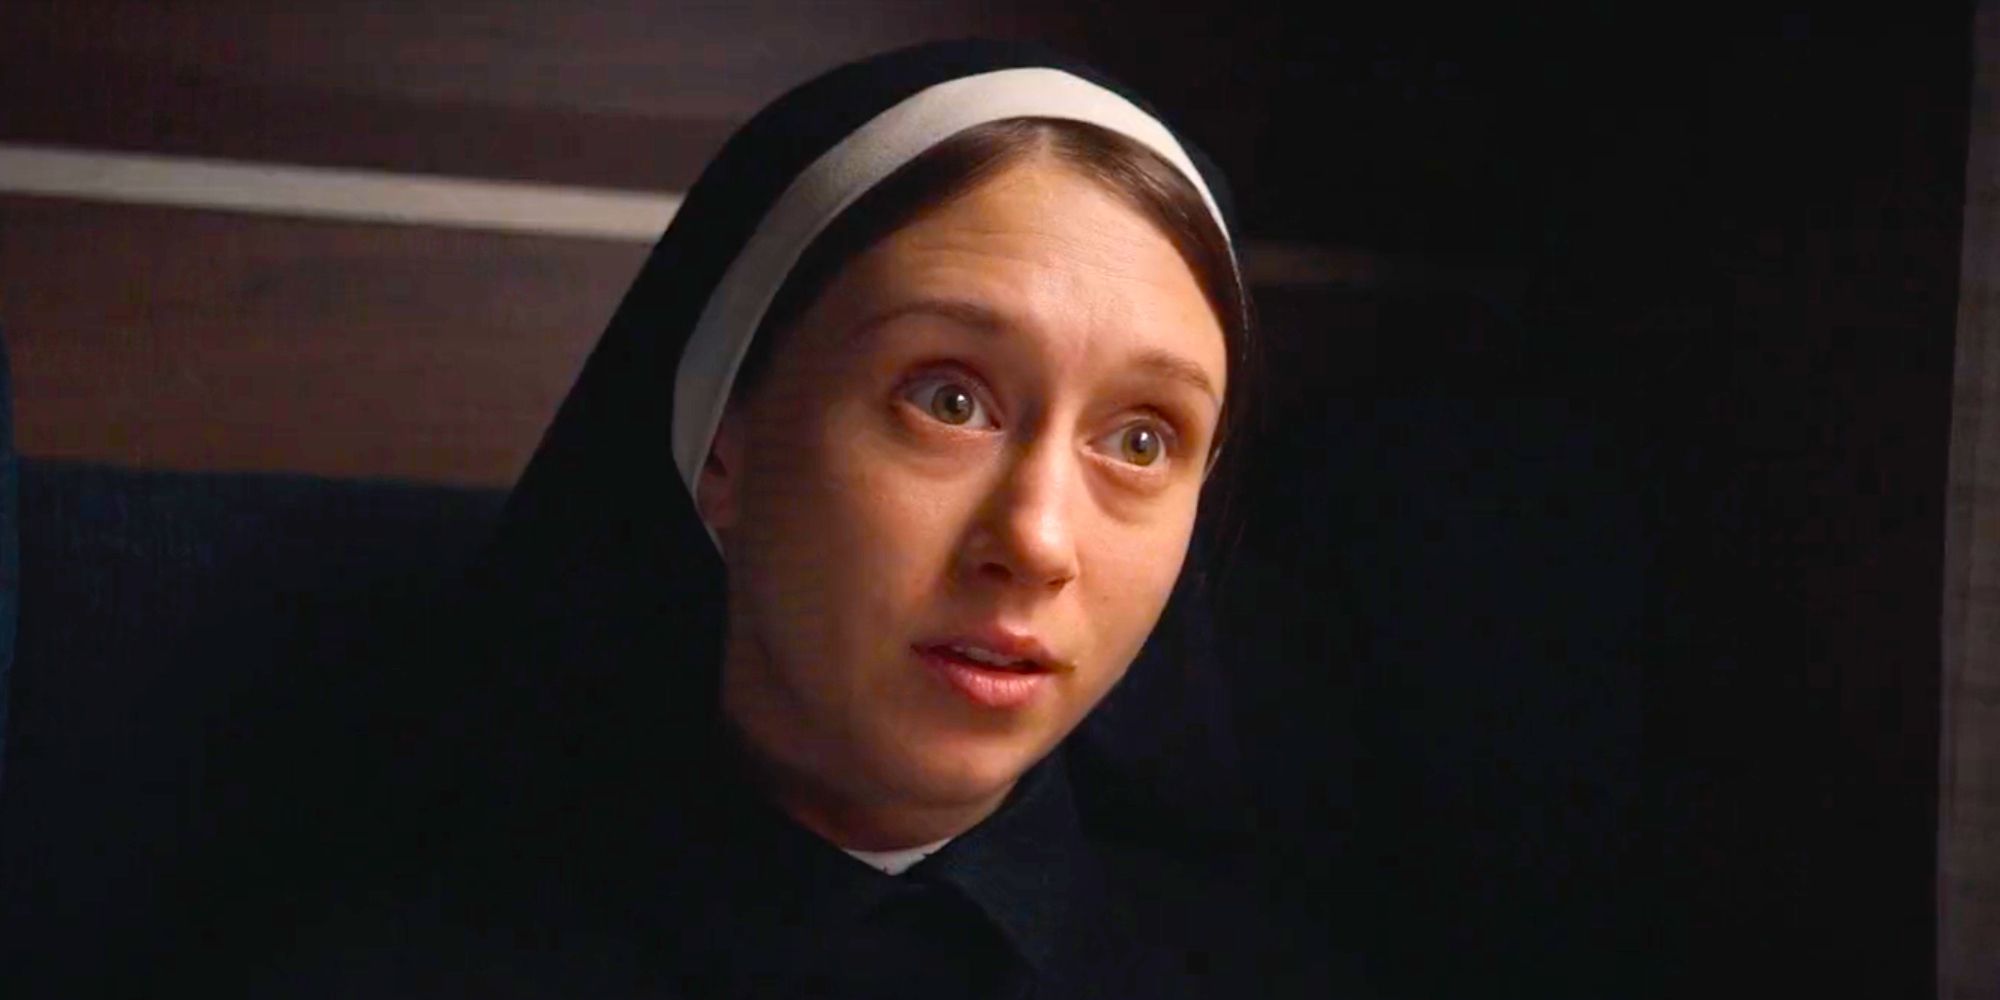 Sister Irene sitting on a train and talking in The Nun 2